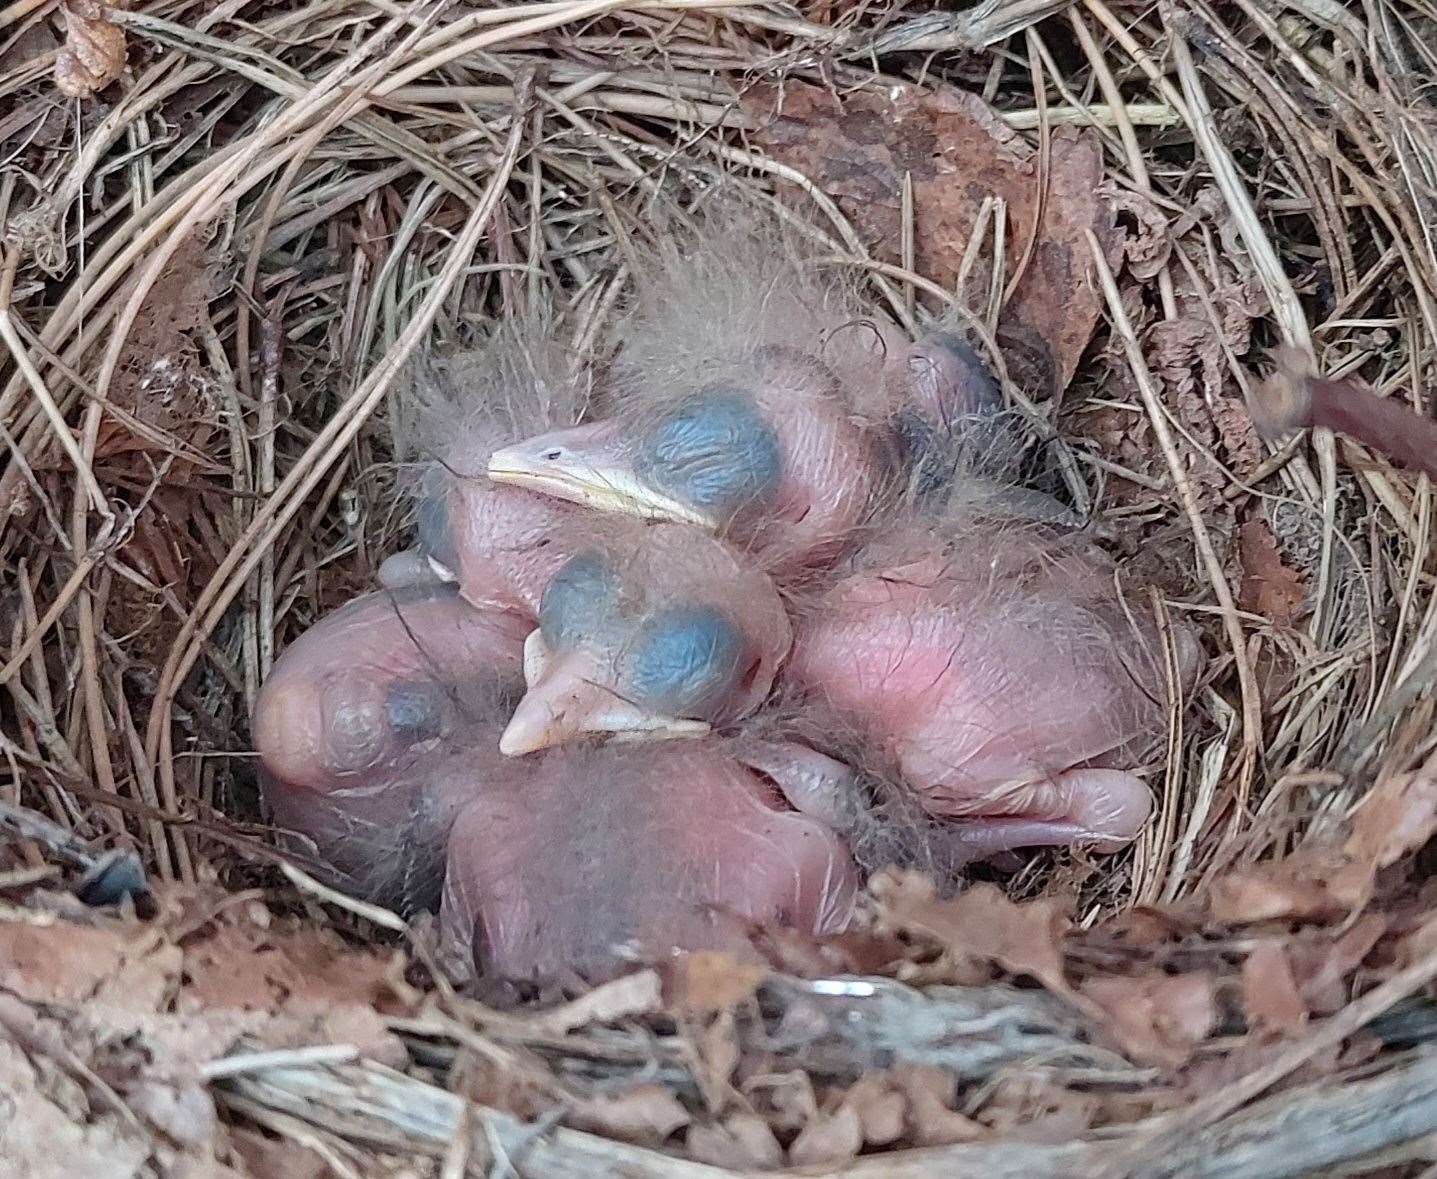 Baby blackbirds found in a nest in late January. Image: Mike Hill.